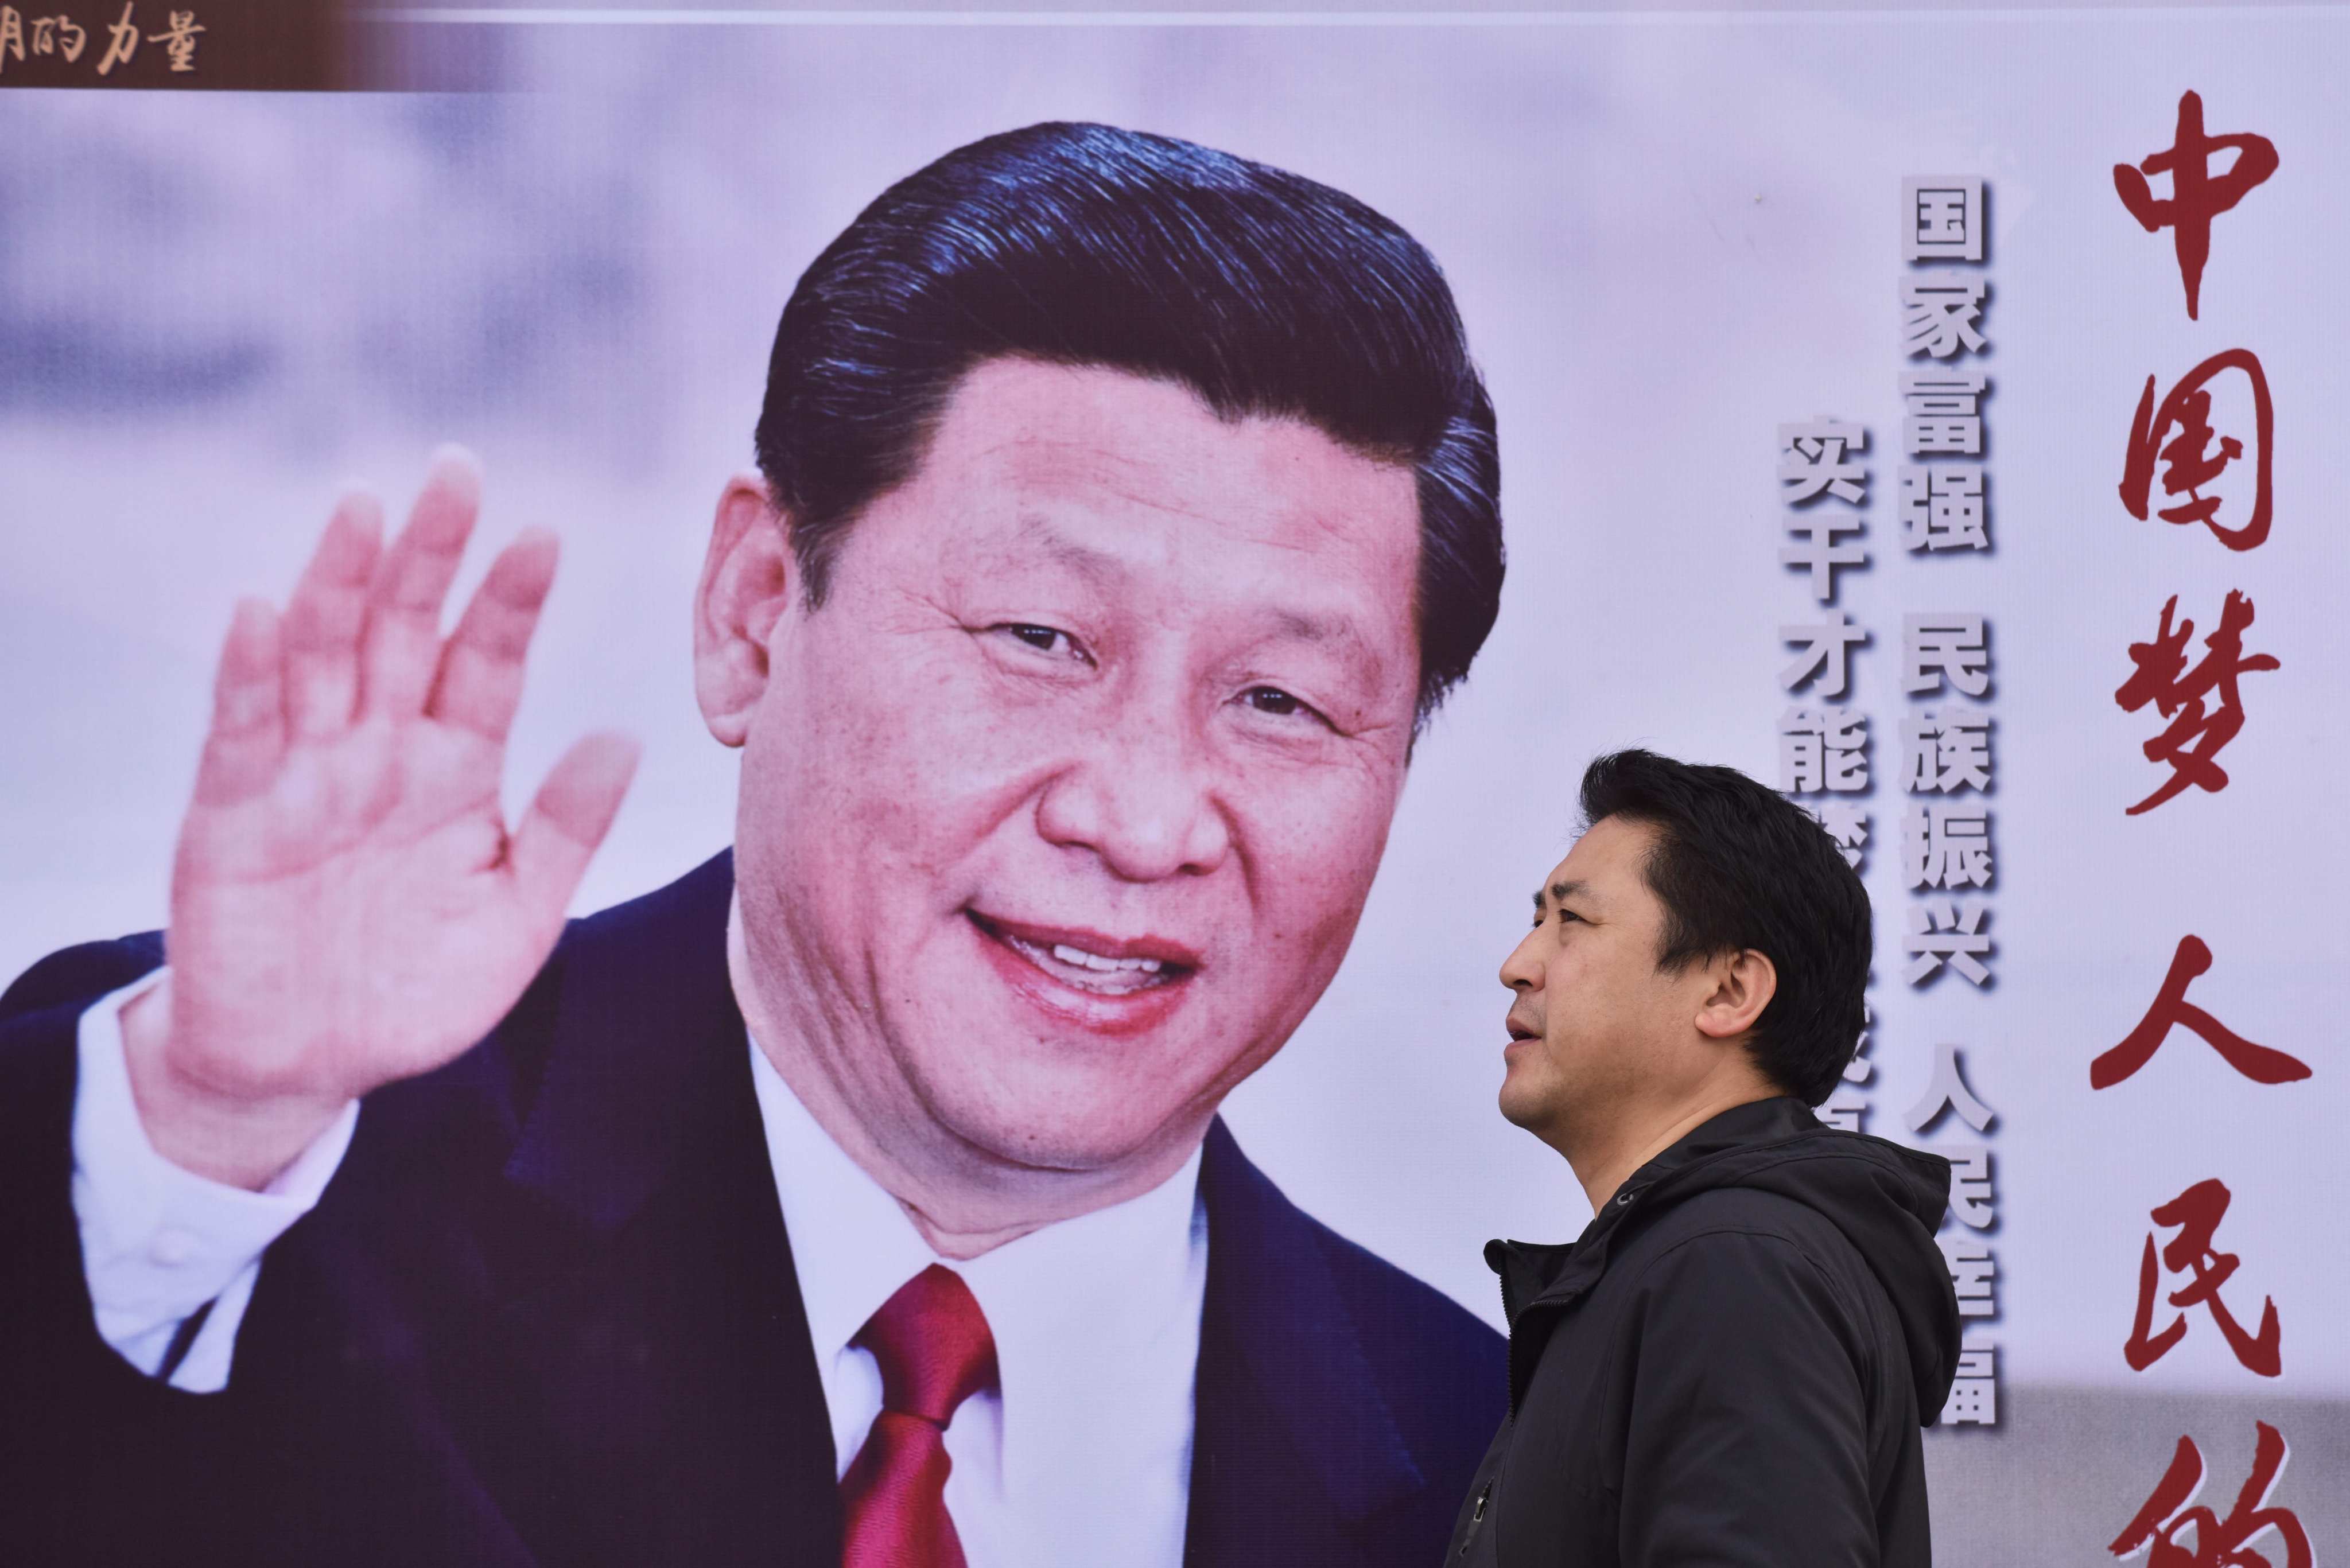 Since Xi’s thoughts on culture were unveiled last weekend at a top national conference, officials across the country have been briefed on the ideology. Photo: AFP